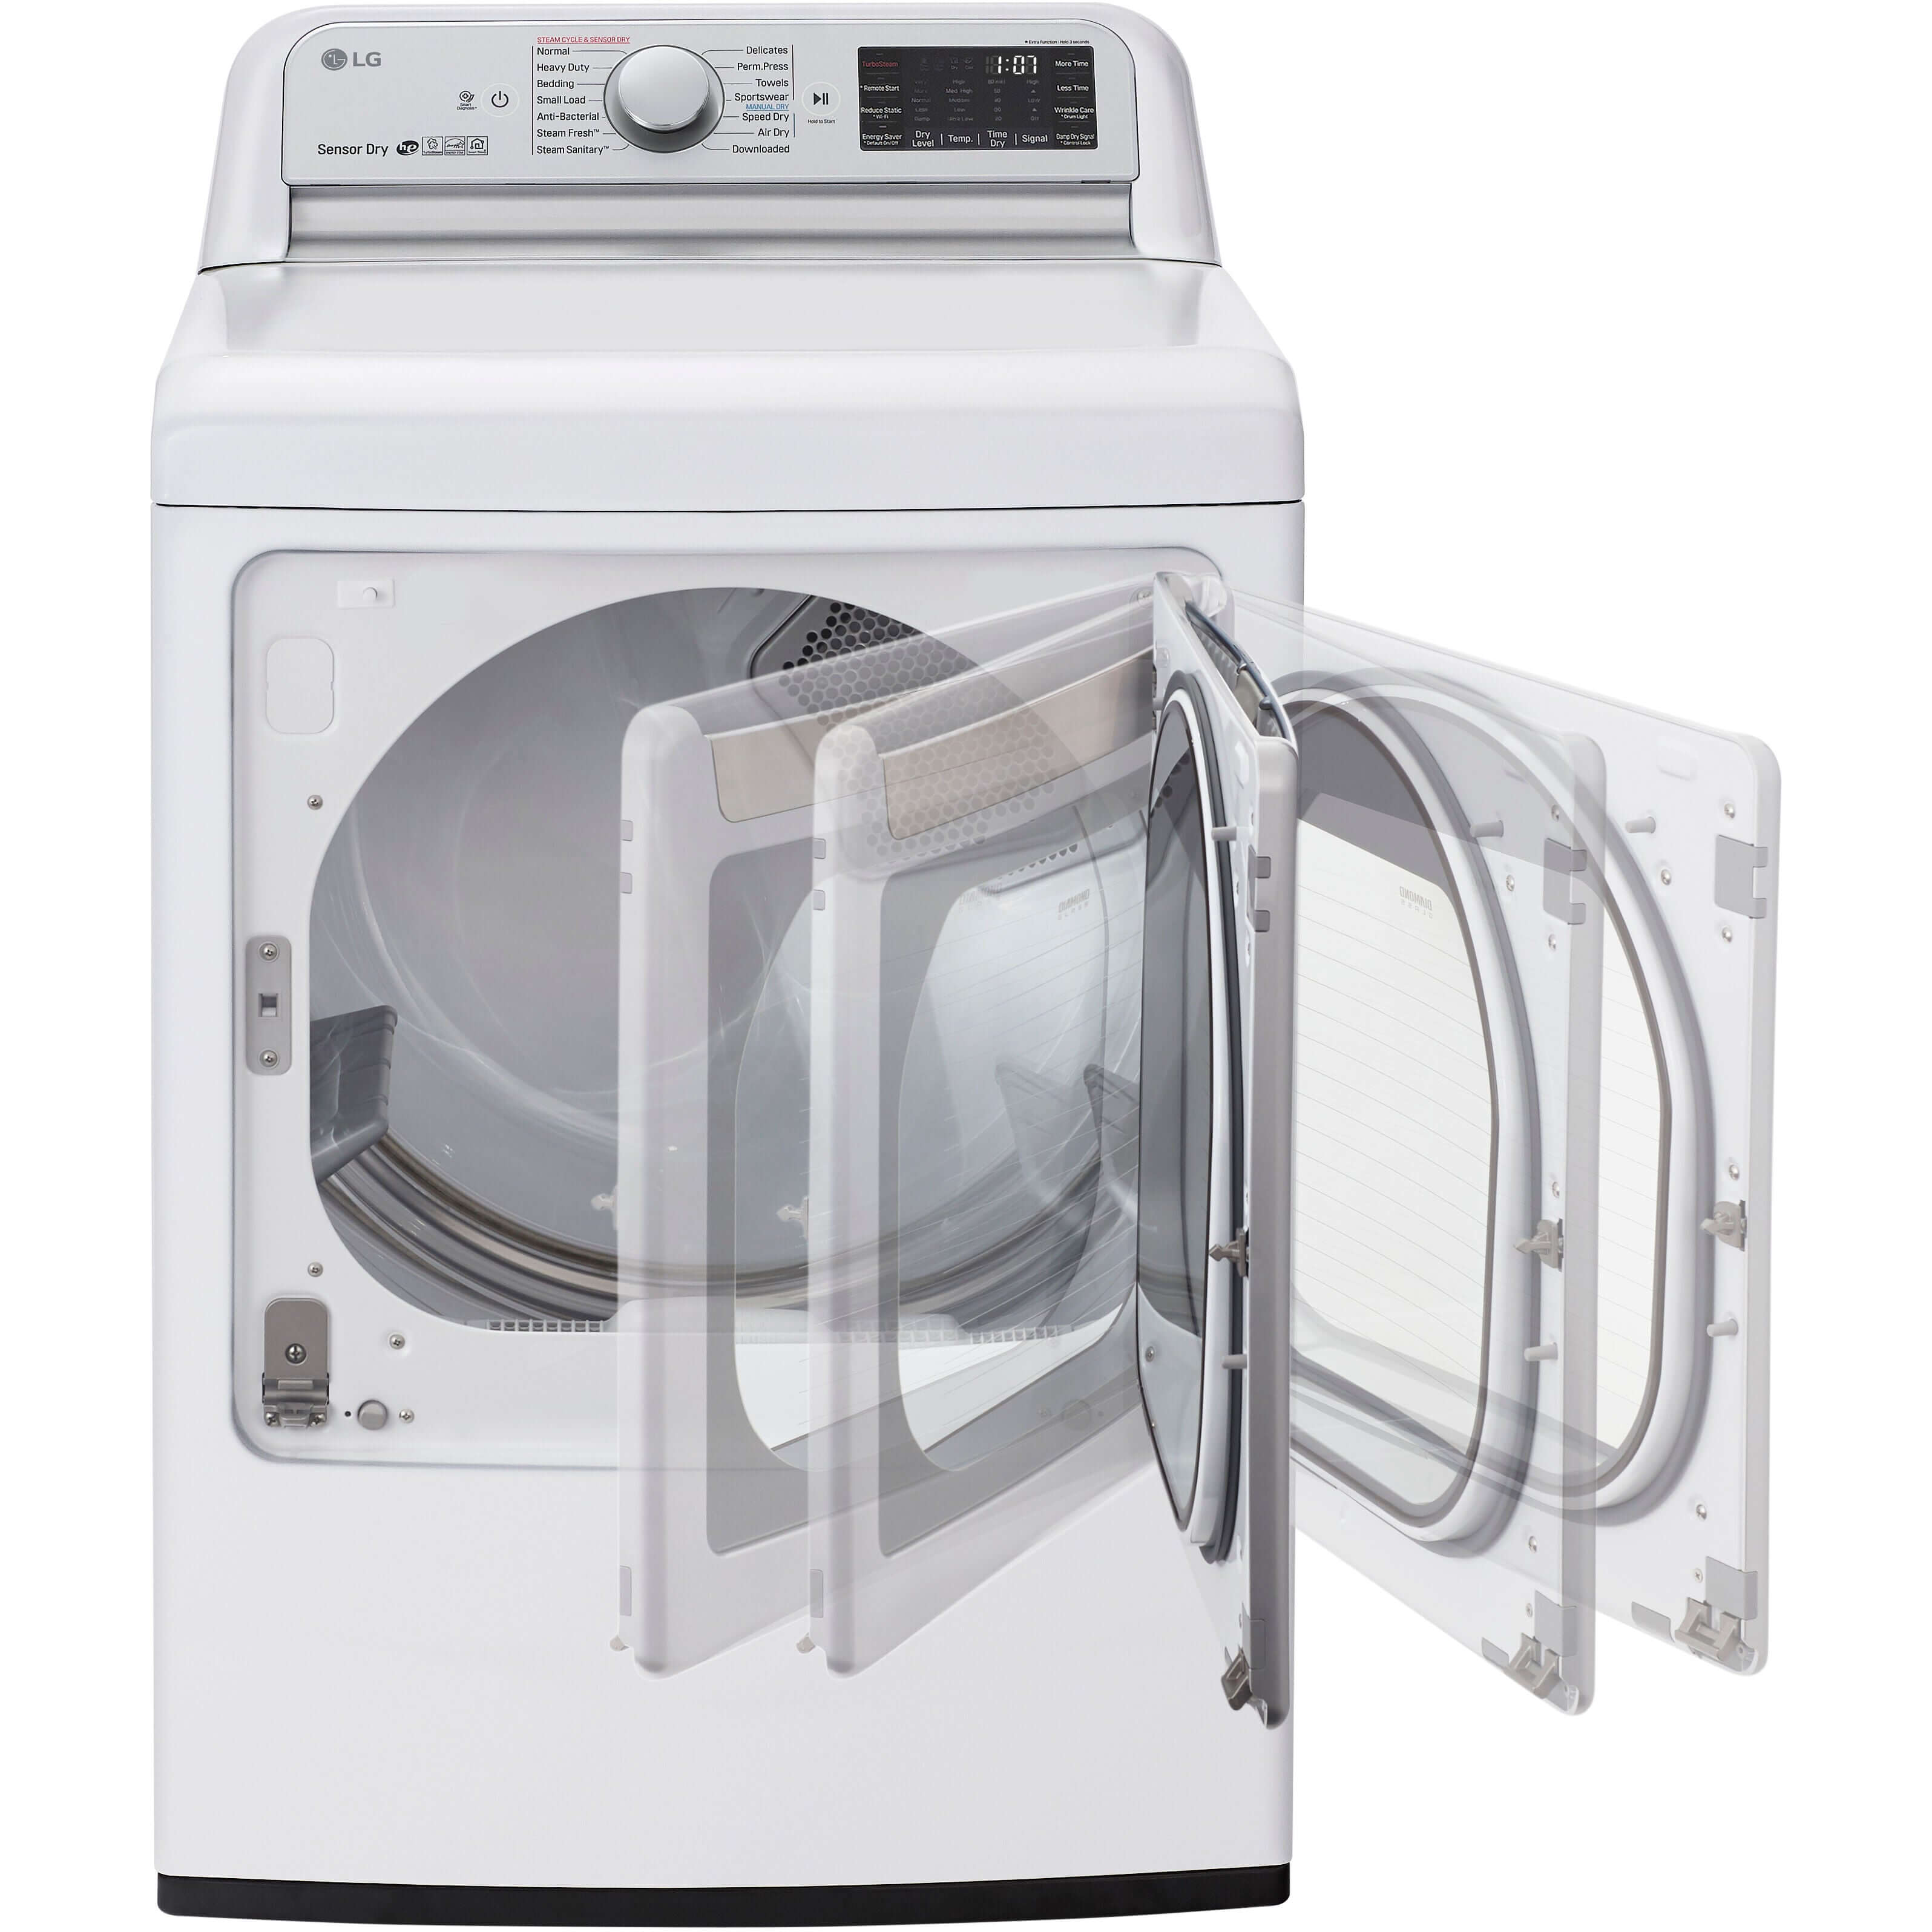 LG 27 Inch Smart wi-fi Enabled Electric Dryer with TurboSteam In White 7.3 cu. ft. (DLEX7800WE)